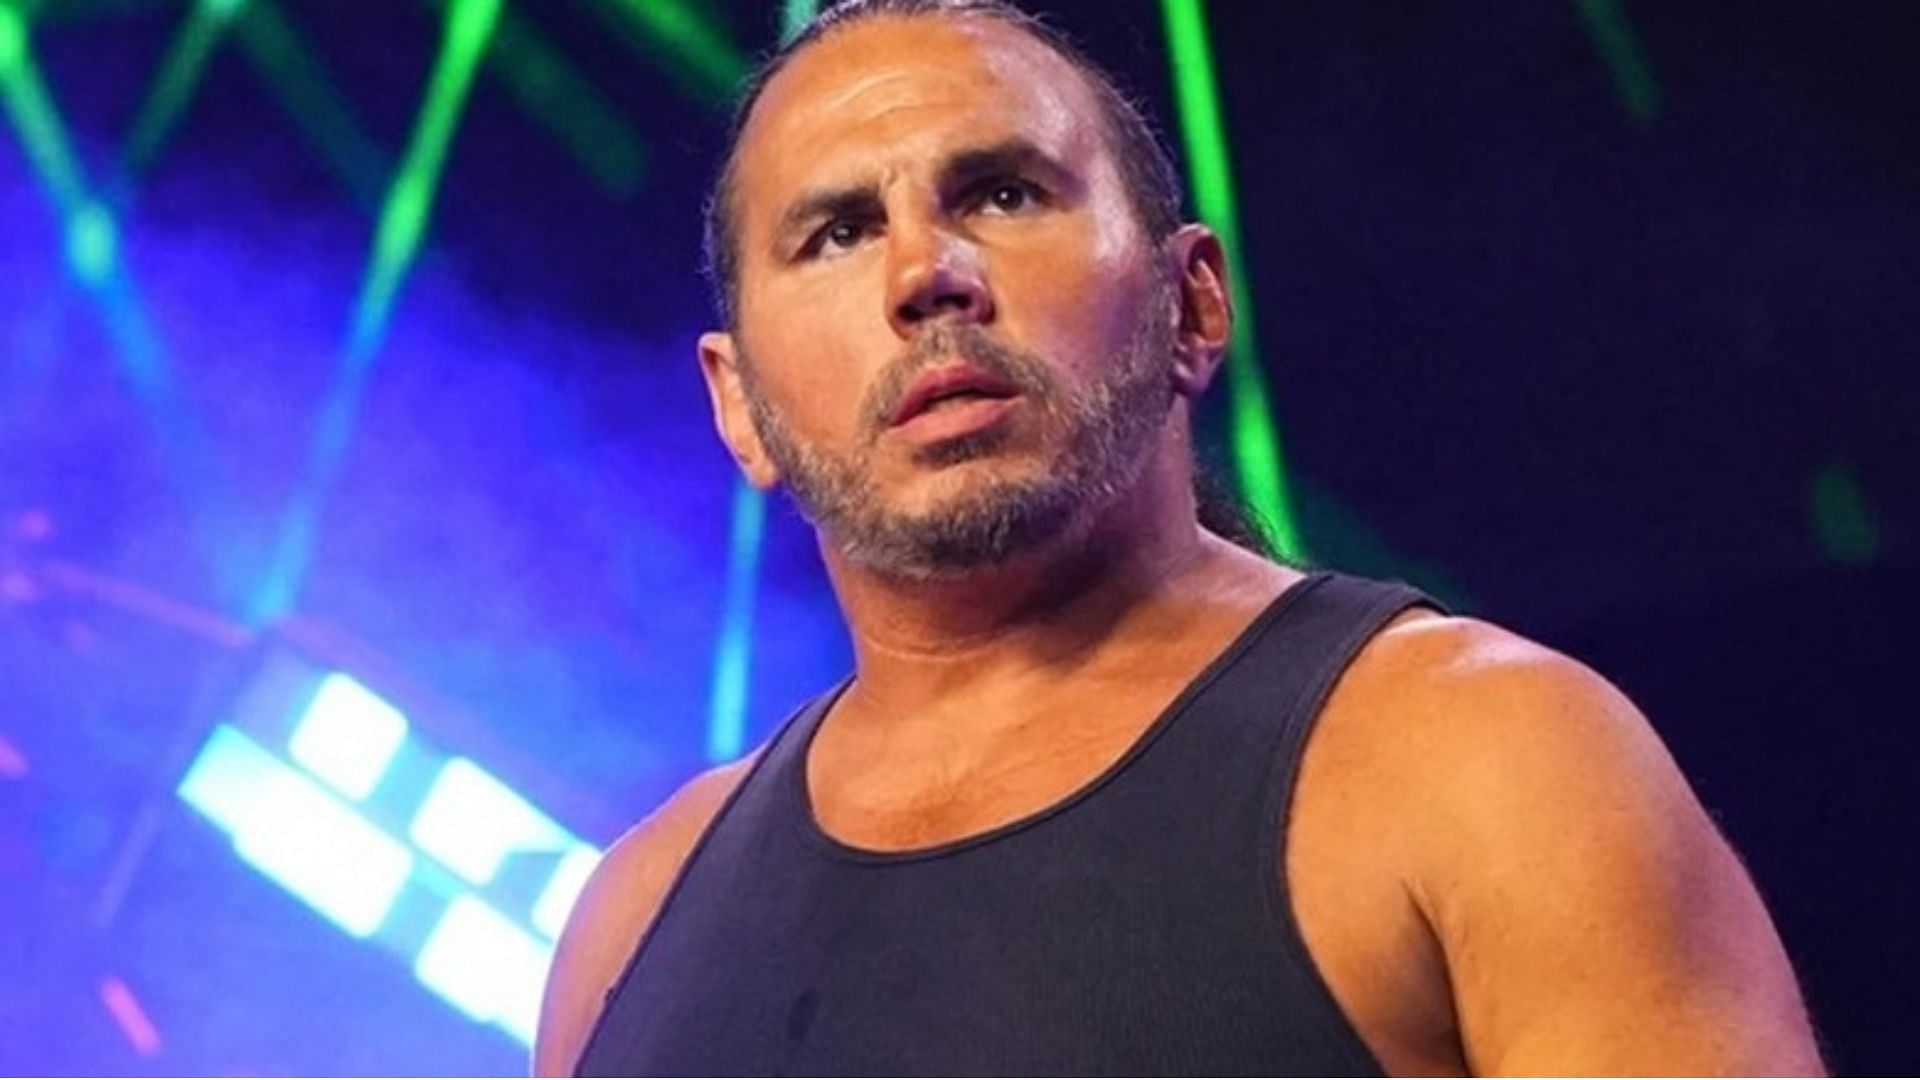 Find out which WWE Hall of Famer had heat with Matt Hardy?